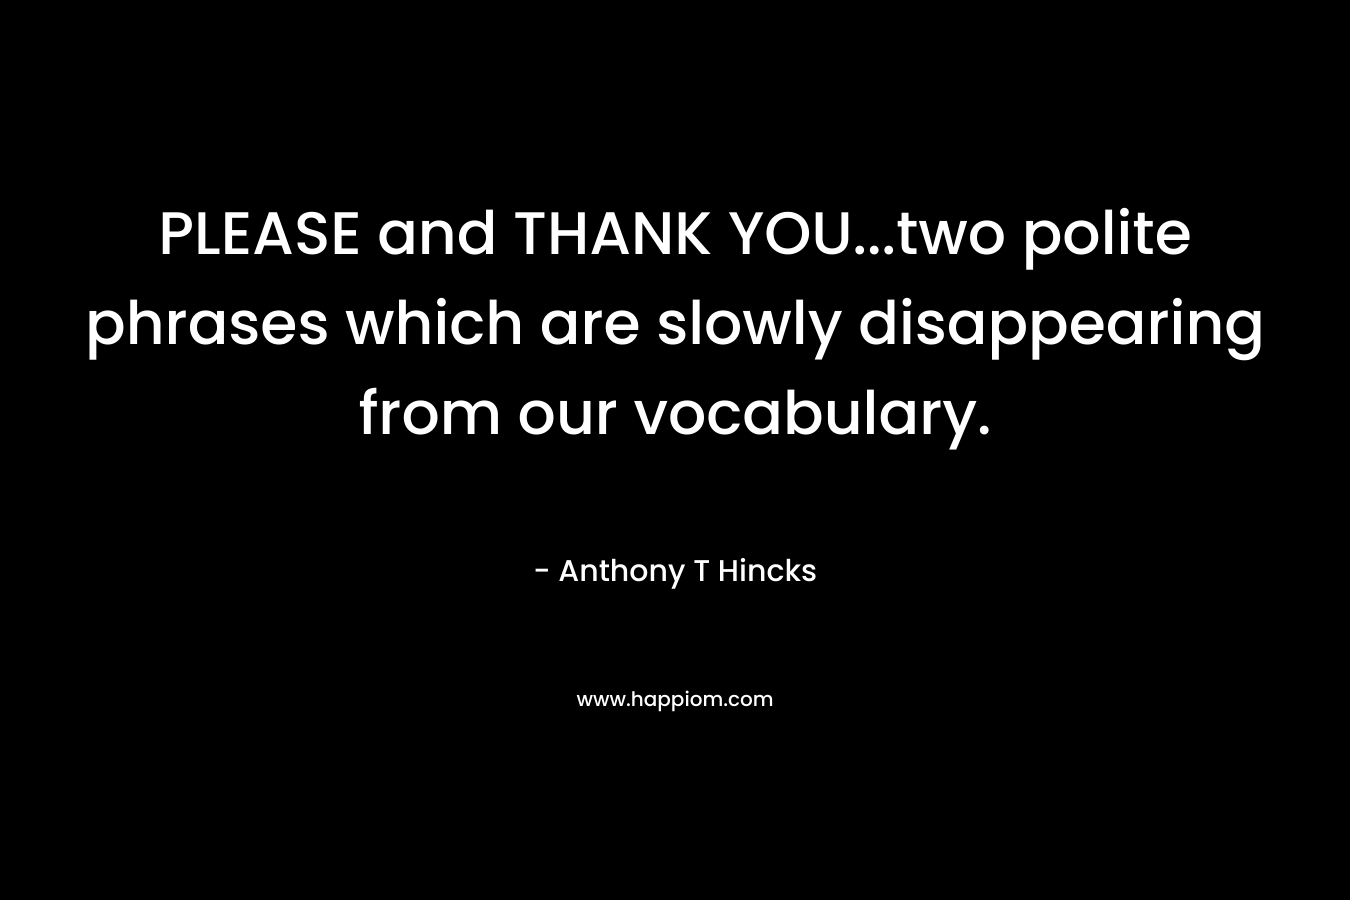 PLEASE and THANK YOU…two polite phrases which are slowly disappearing from our vocabulary. – Anthony T Hincks